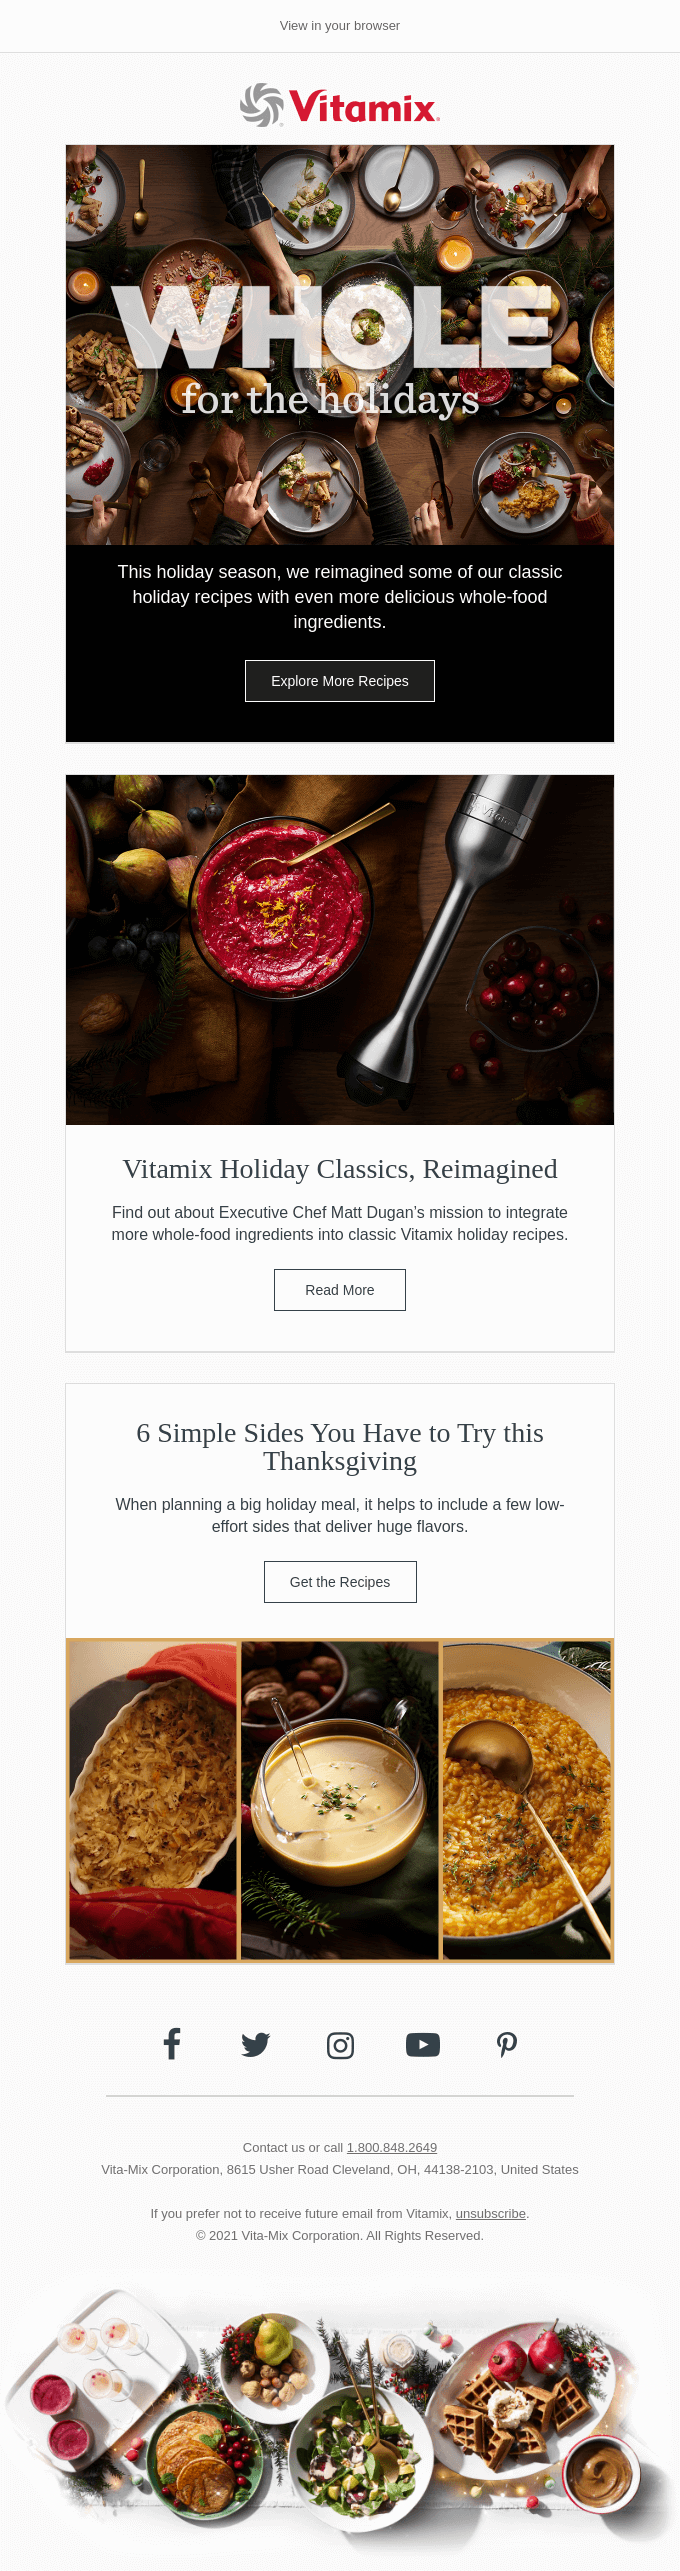 Classic Holiday Recipes, Reimagined | Whole for the Holidays